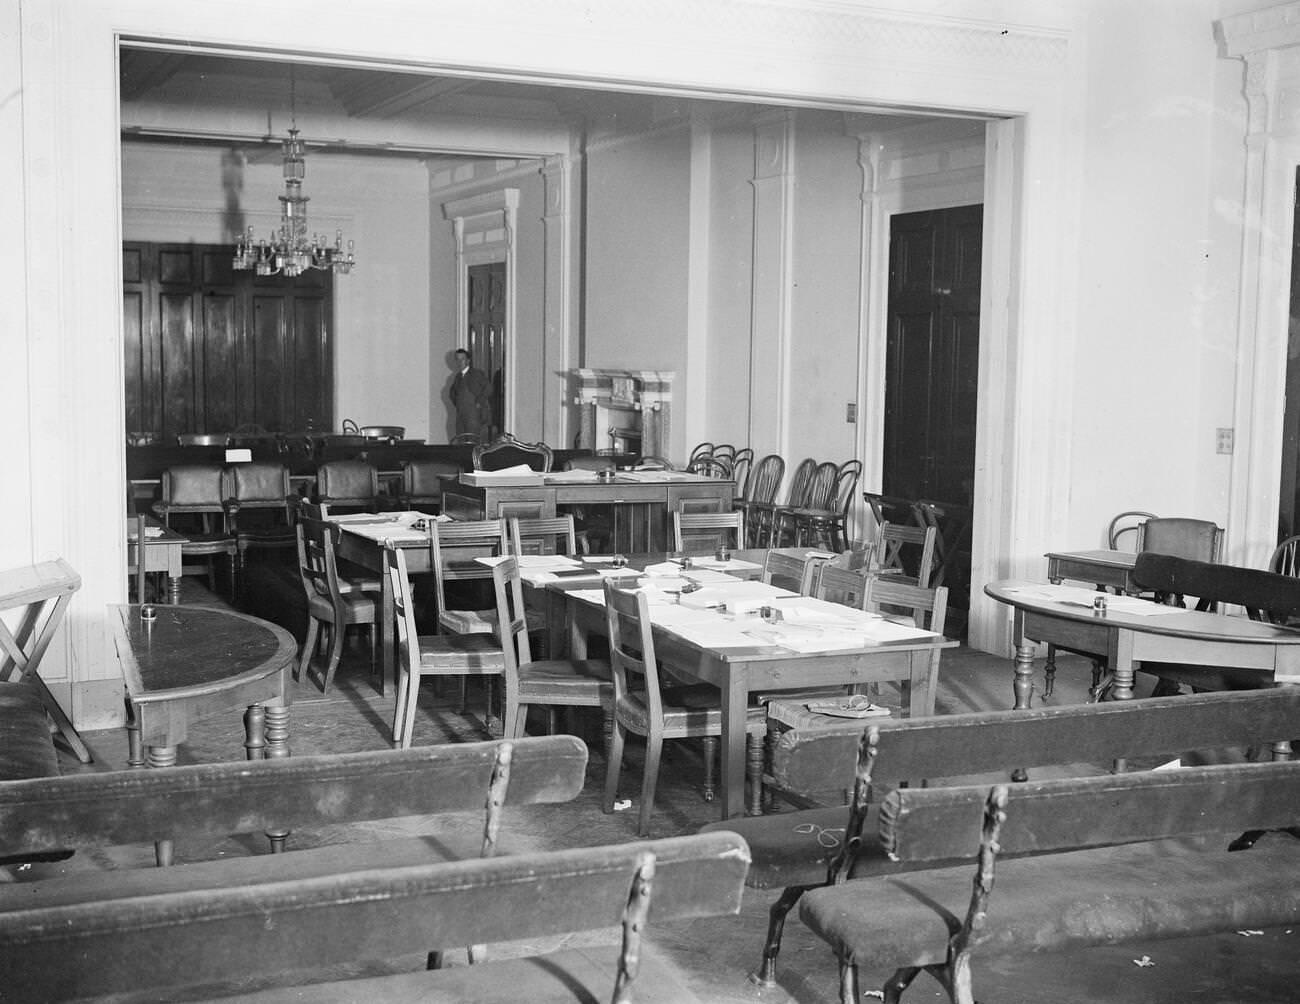 The fateful session of the Dail Eireann opened at the New University College Dublin, 1921.